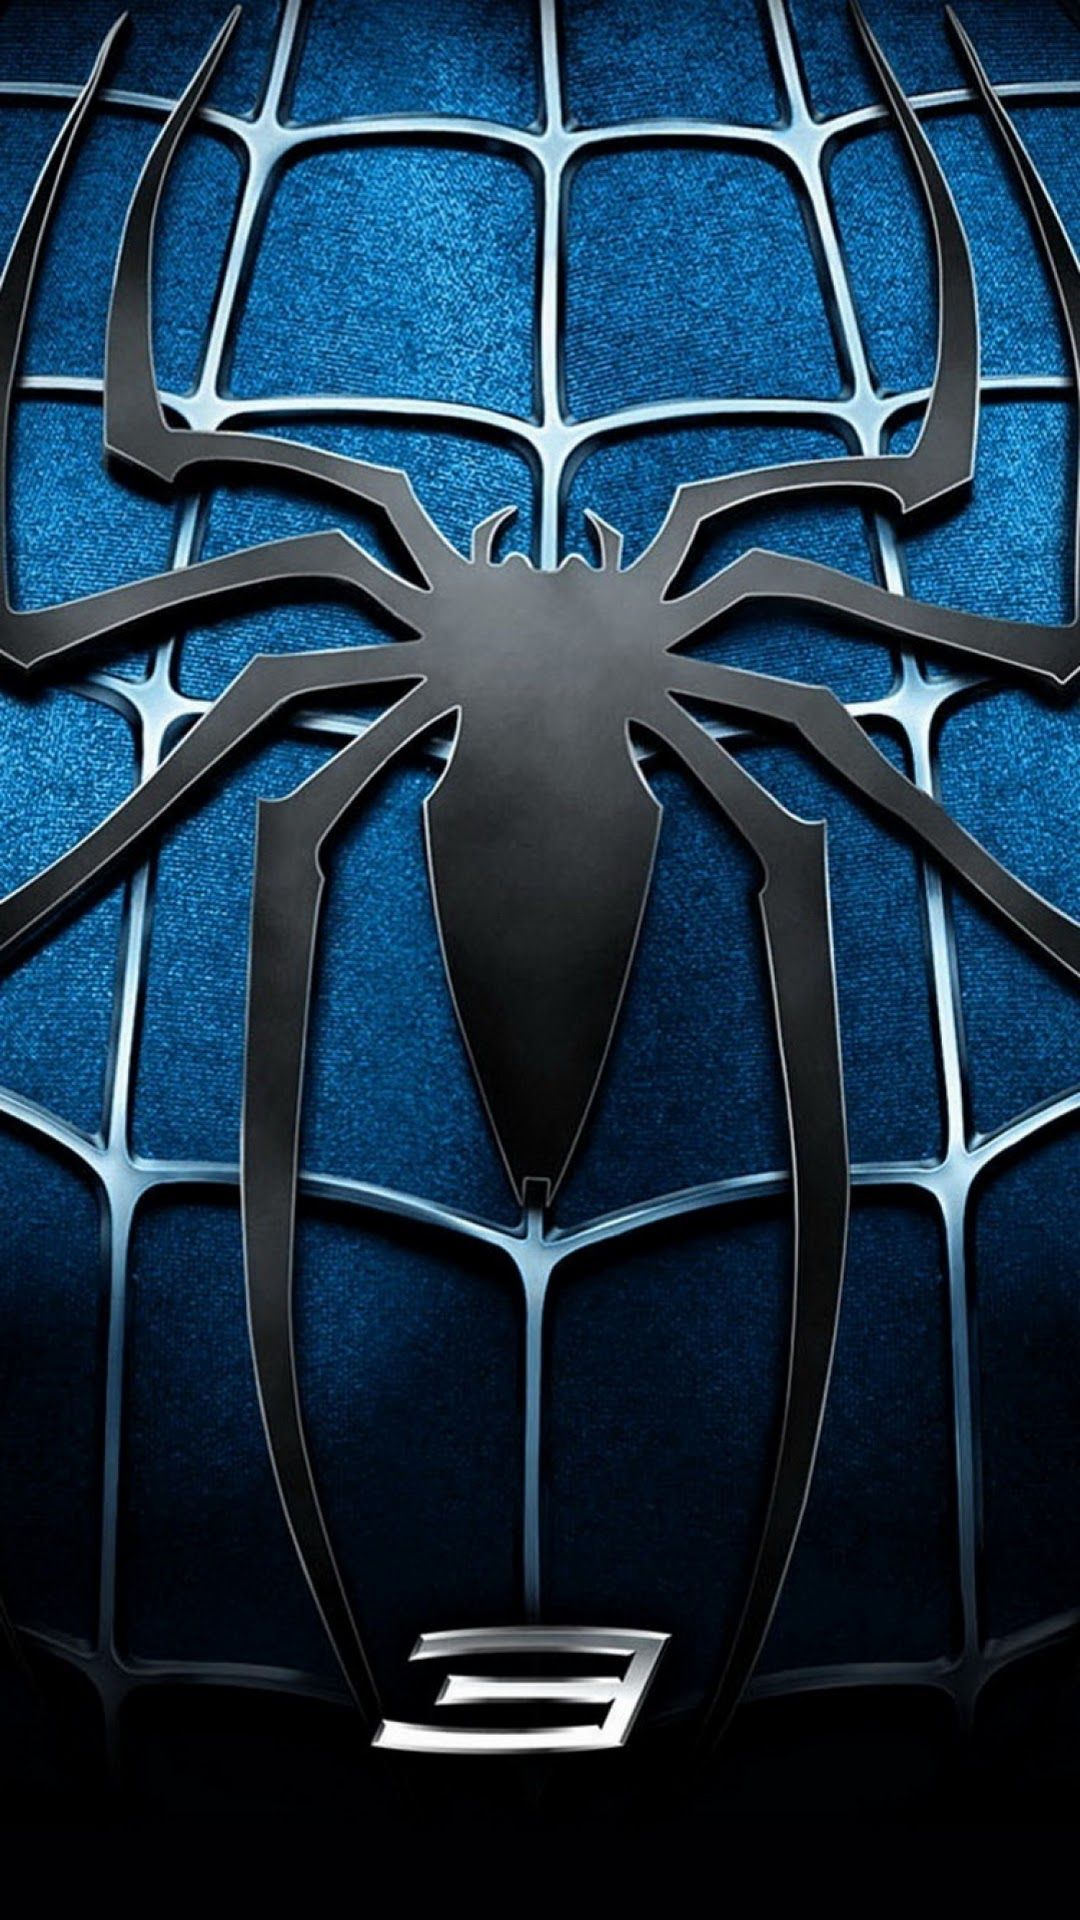 All Android Wallpaper: Spider Man 3 Blue Chest Logo Android Wallpaper